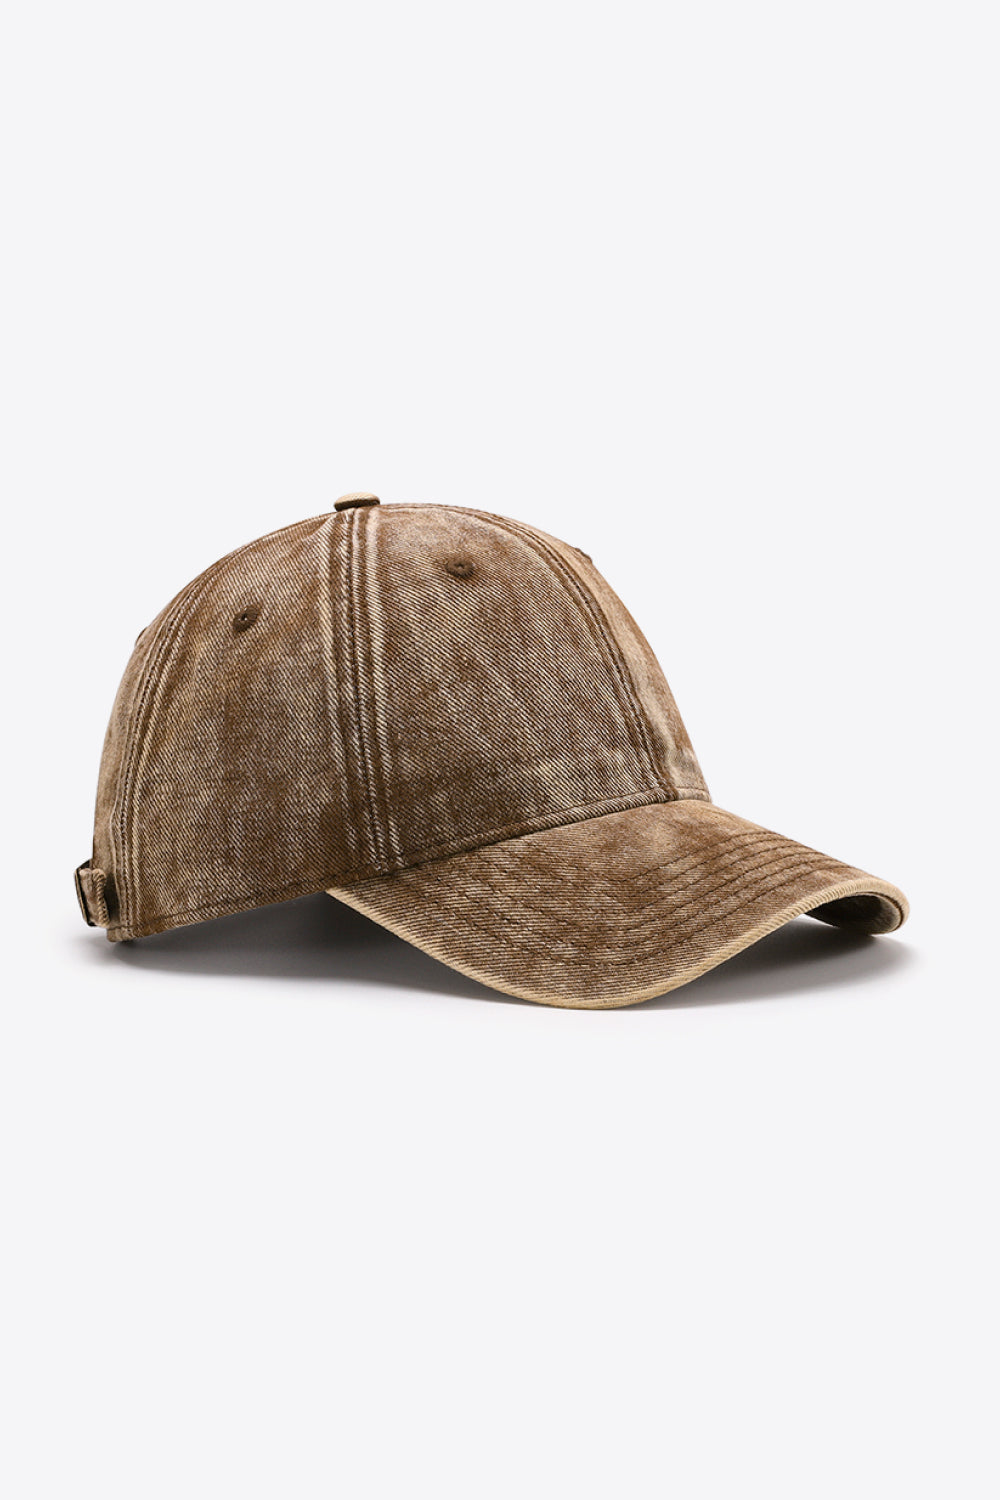 Villa Blvd Washed Baseball Hat ? Multiple Colors Available ?